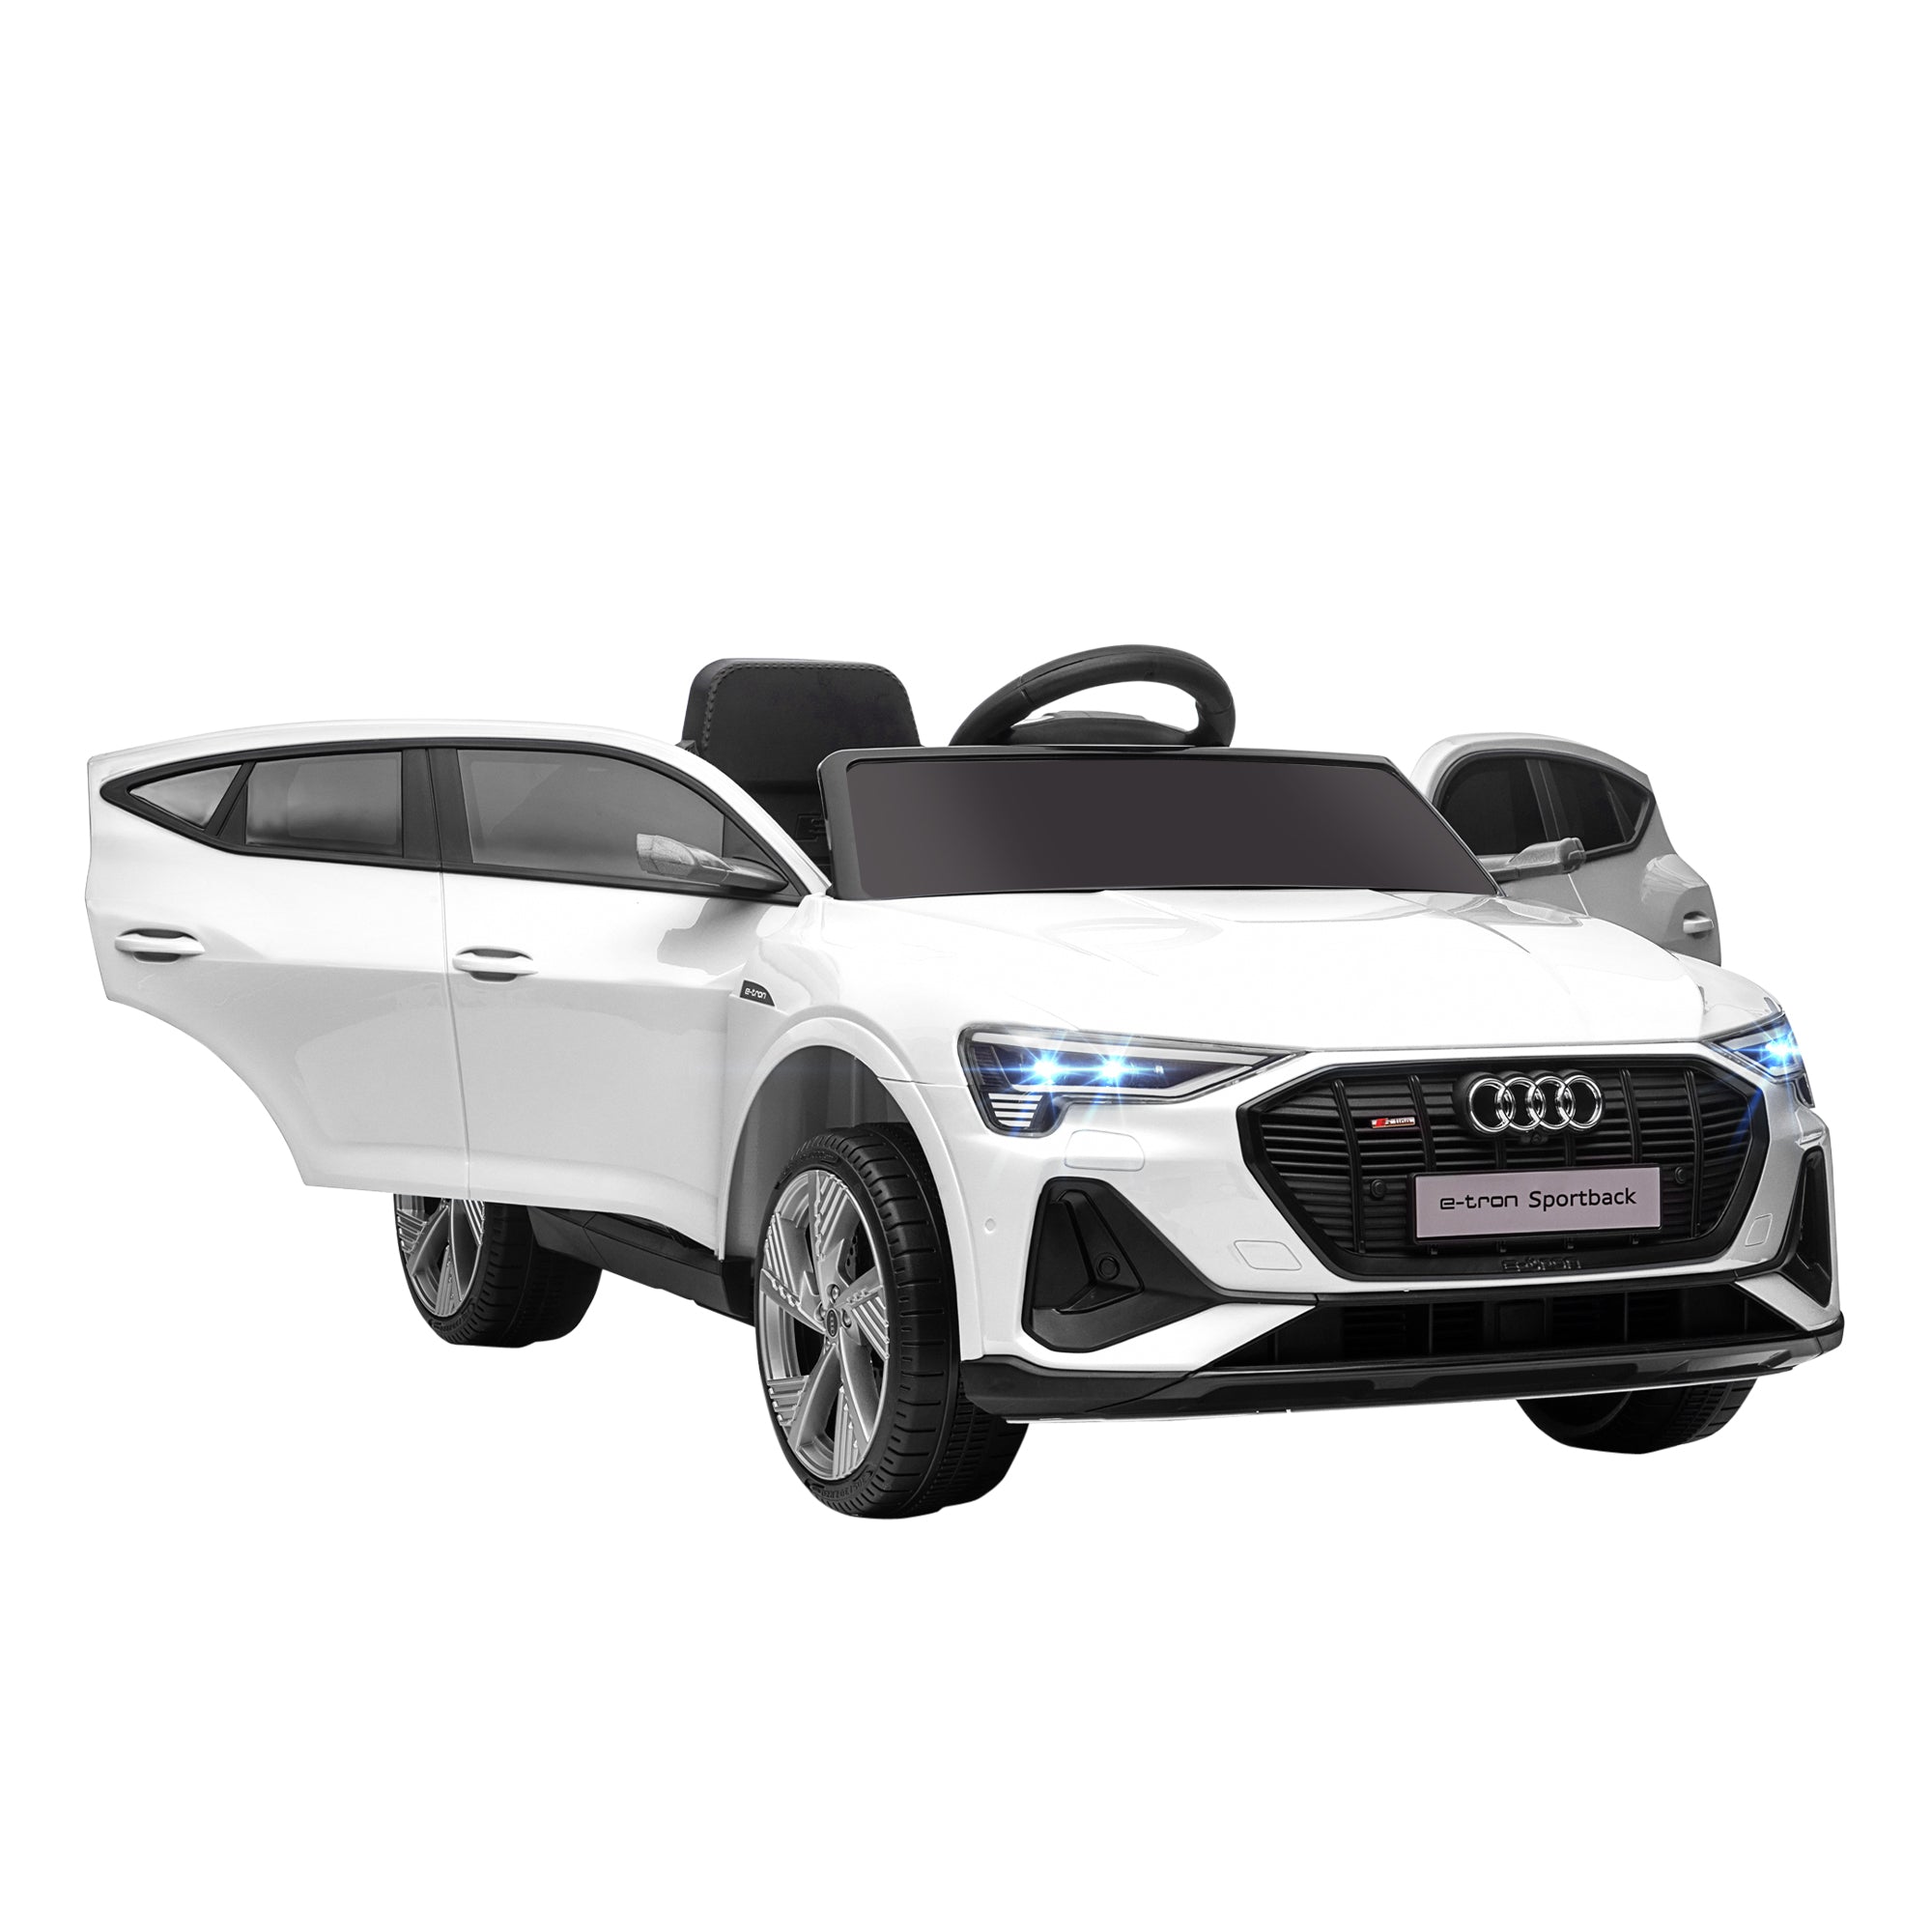 HOMCOM Audi E-tron Licensed 12V Kids Electric Ride On Car with Remote, Music, Lights & Suspension for 3-5 Years (White)